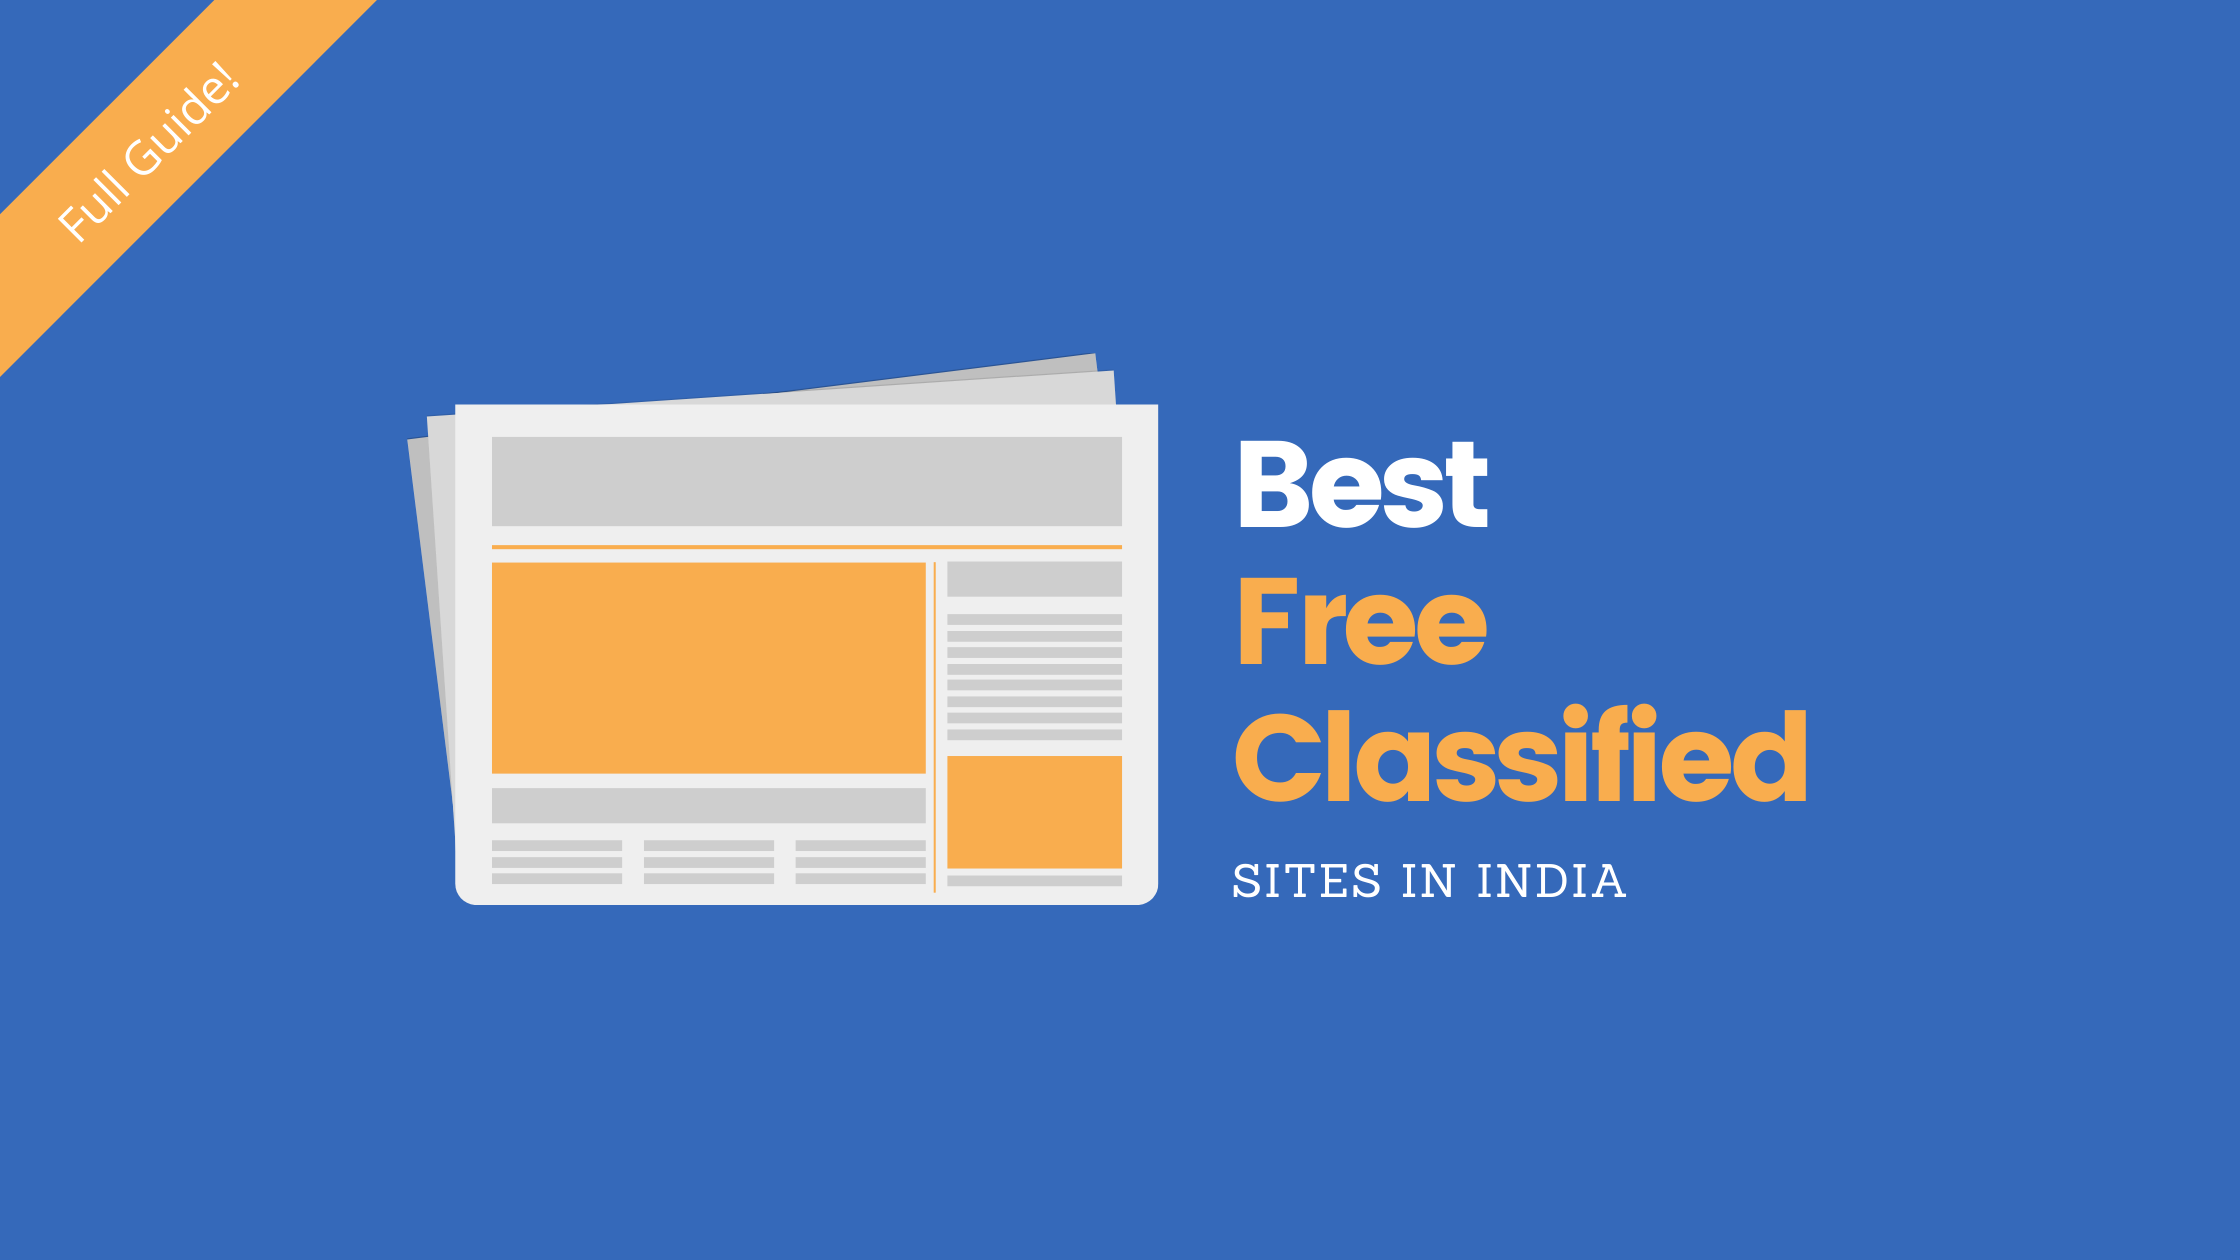 Best Free Classified Sites In India